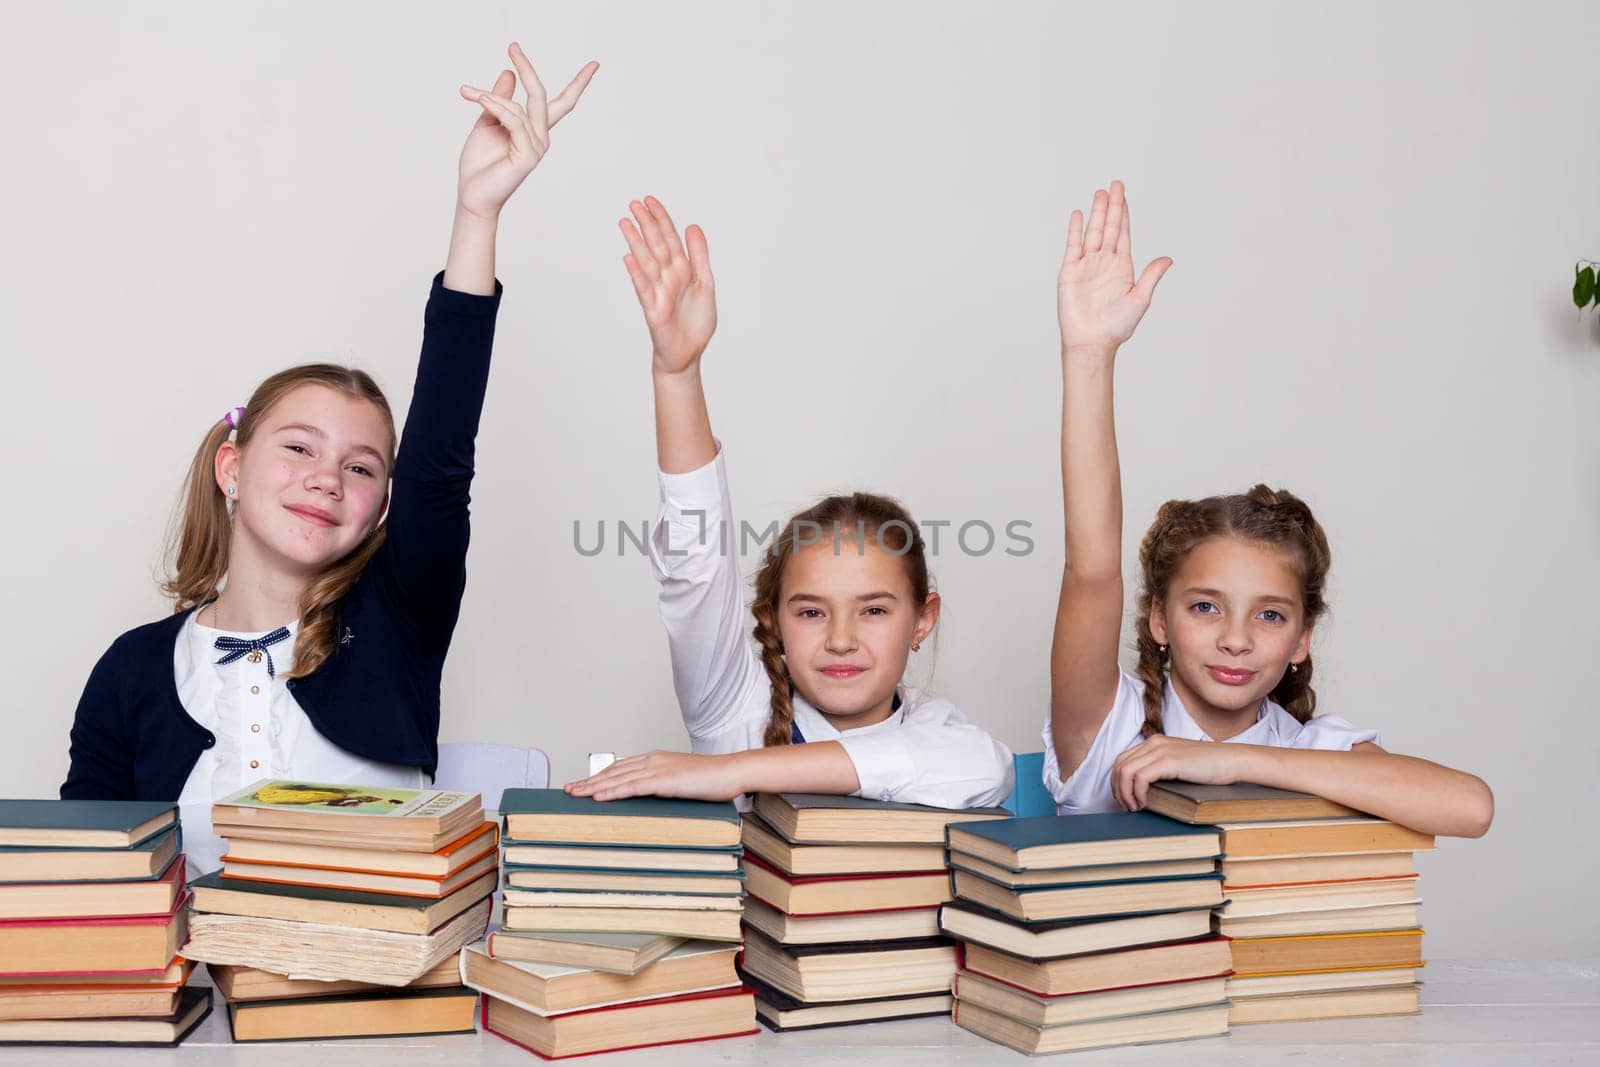 thre girls with books in class at a desk at school by Simakov